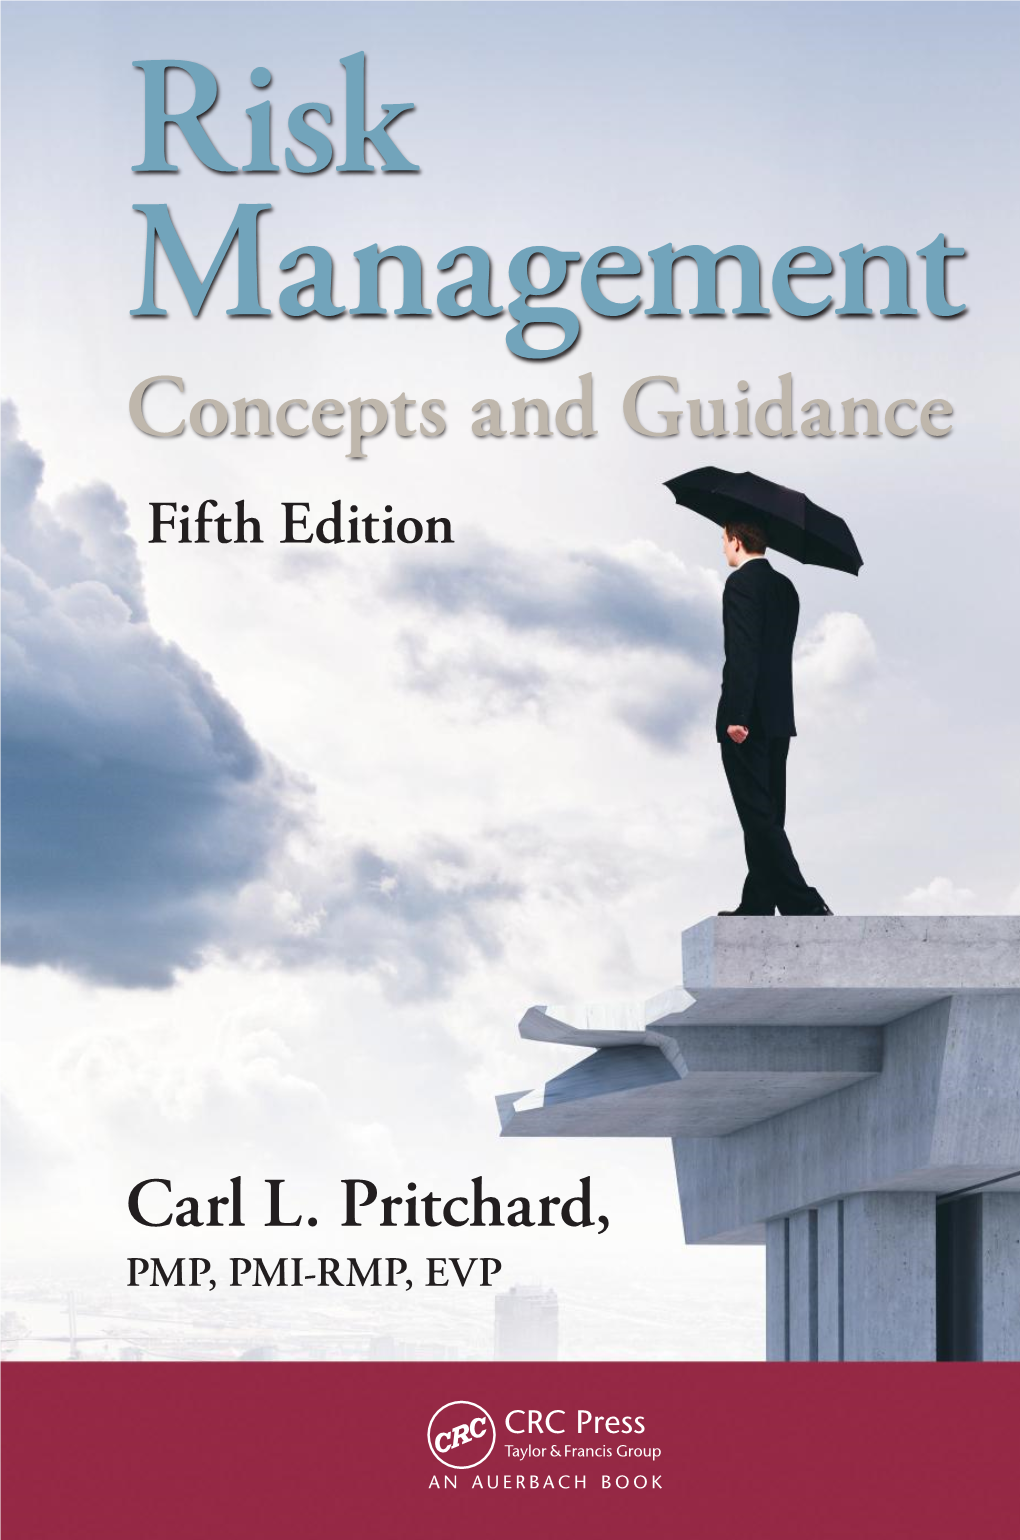 Risk Management: Concepts and Guidance Supplies a Look at Risk in Light of Current Information, Yet Remains Grounded in the History of Risk Practice